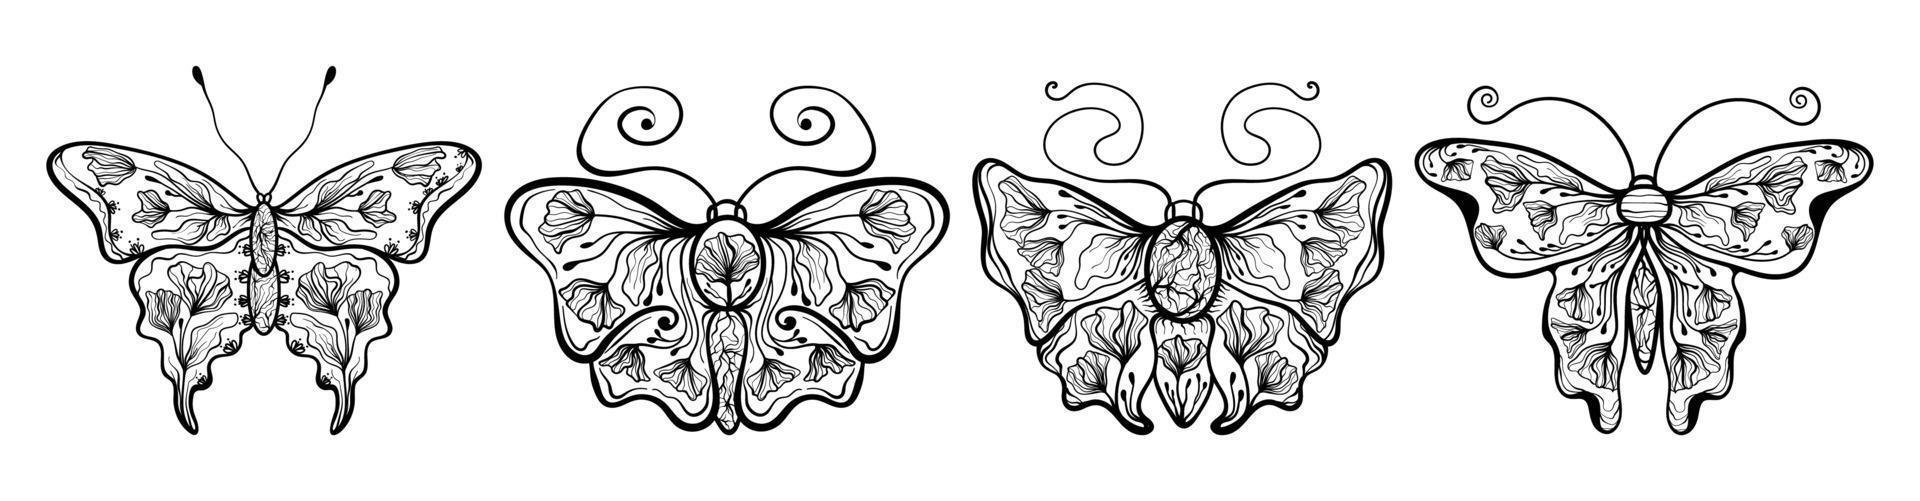 Boho Floral Butterfly Moth Insect Lineart Set Vector Illustration 02